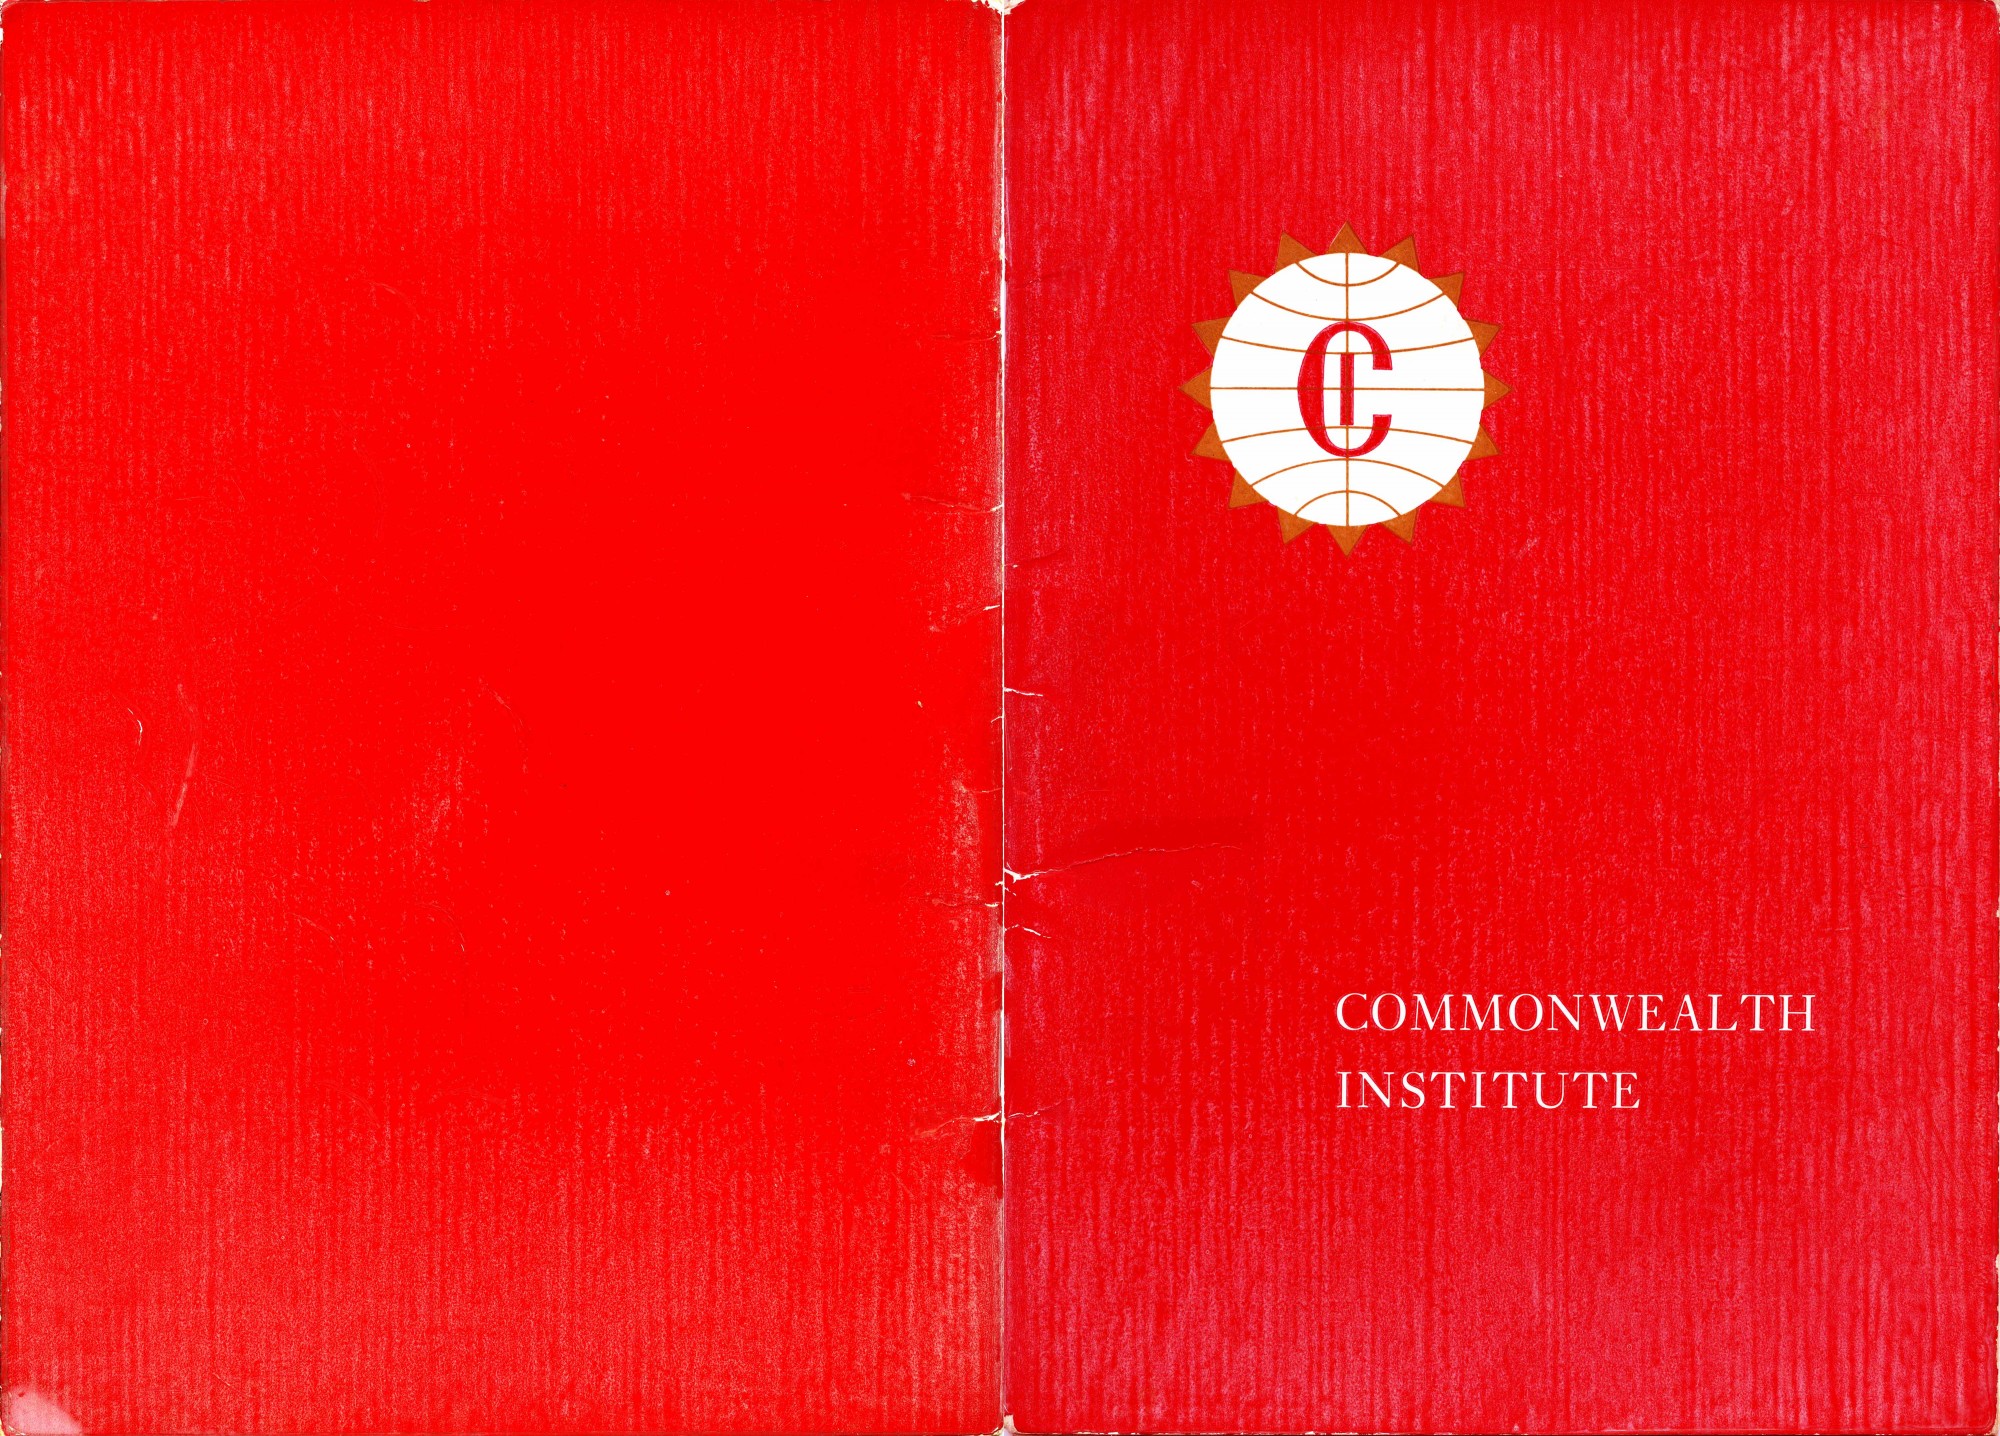 Image showing the red and white front and back covers of the Commonwealth Institute front and back cover with the white, red and brown logo on the front page